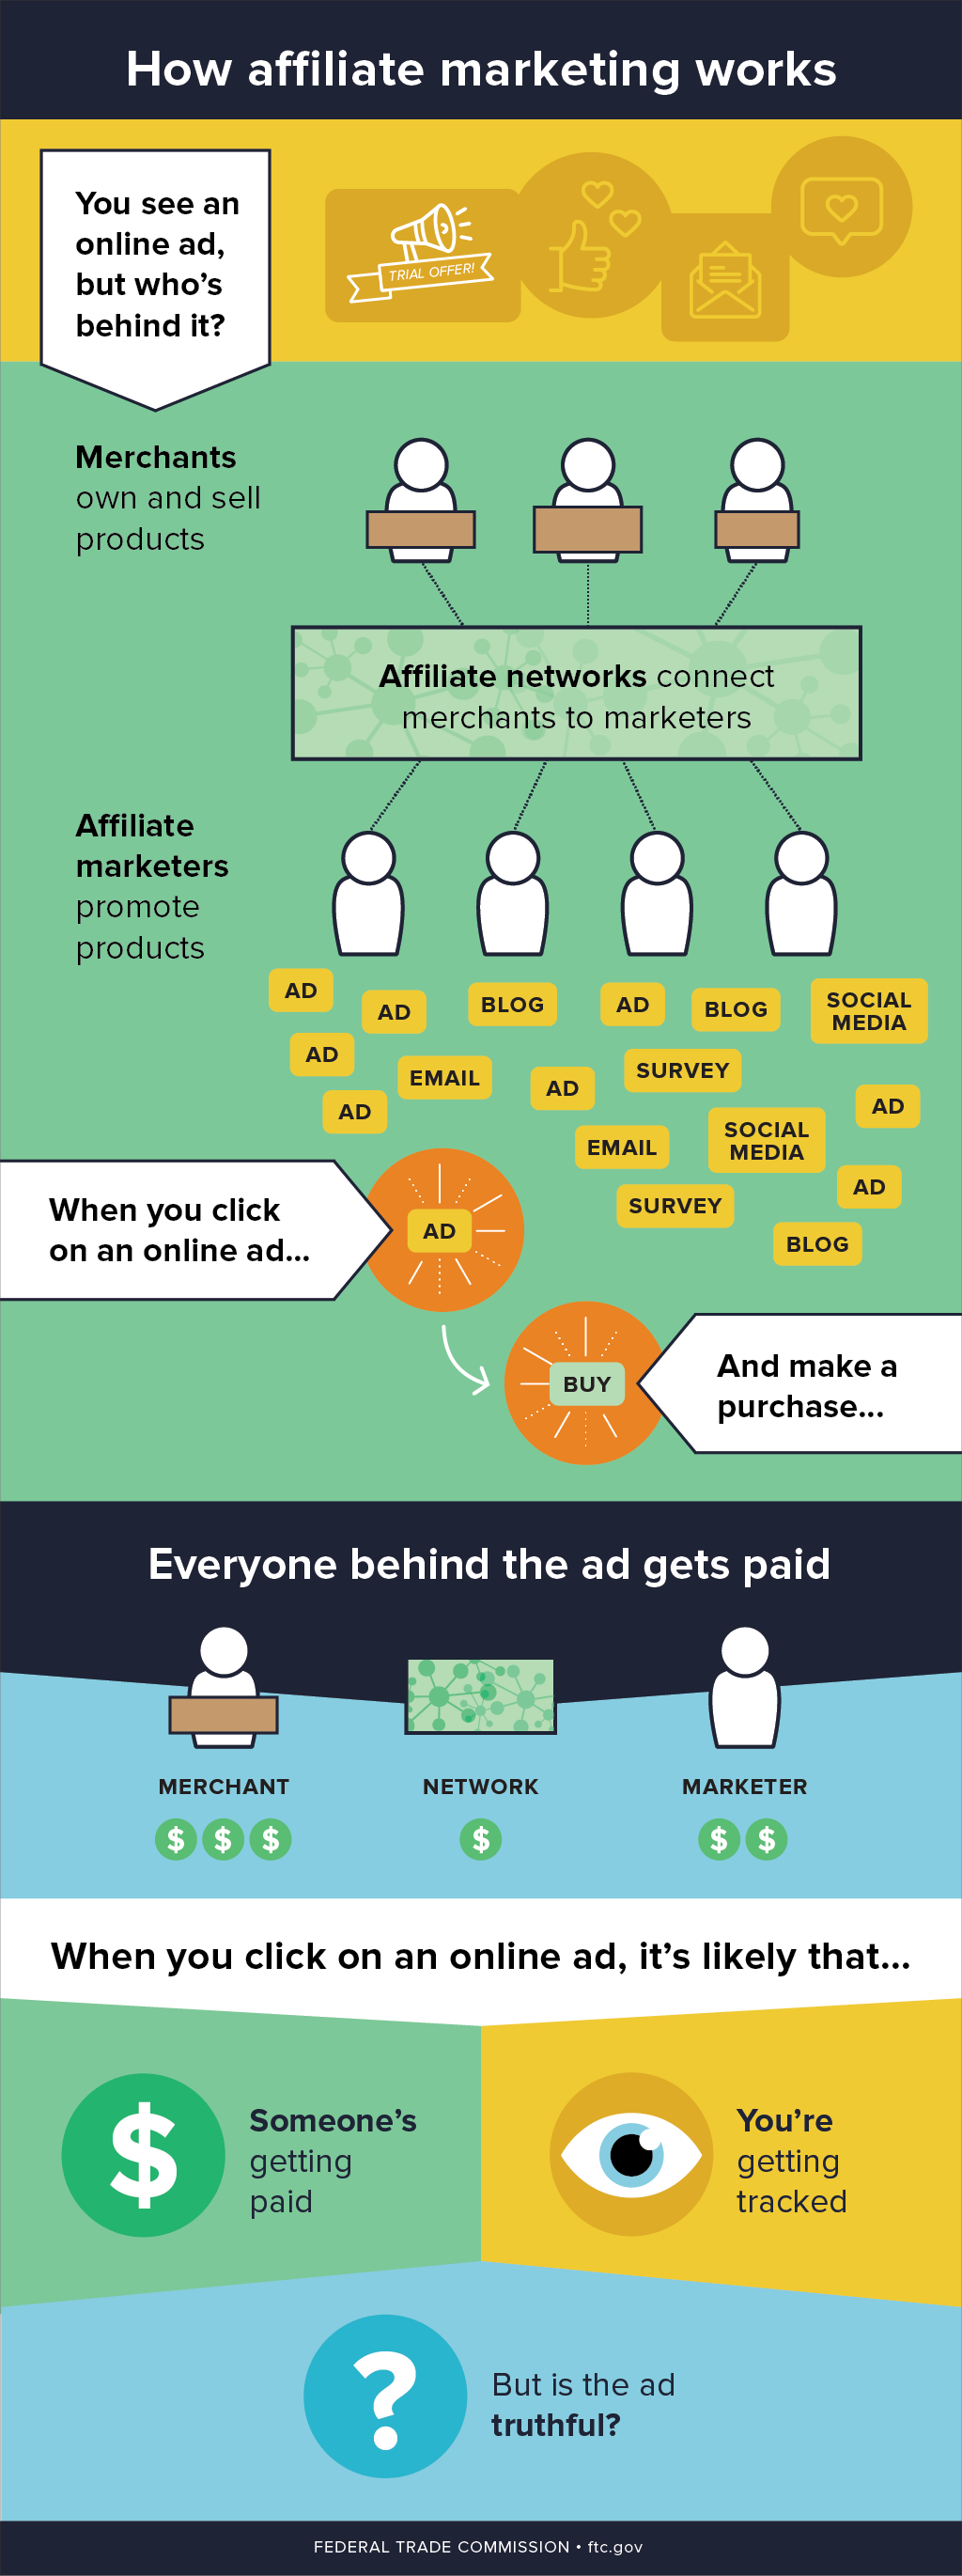 How Affiliate Marketing Works infographic